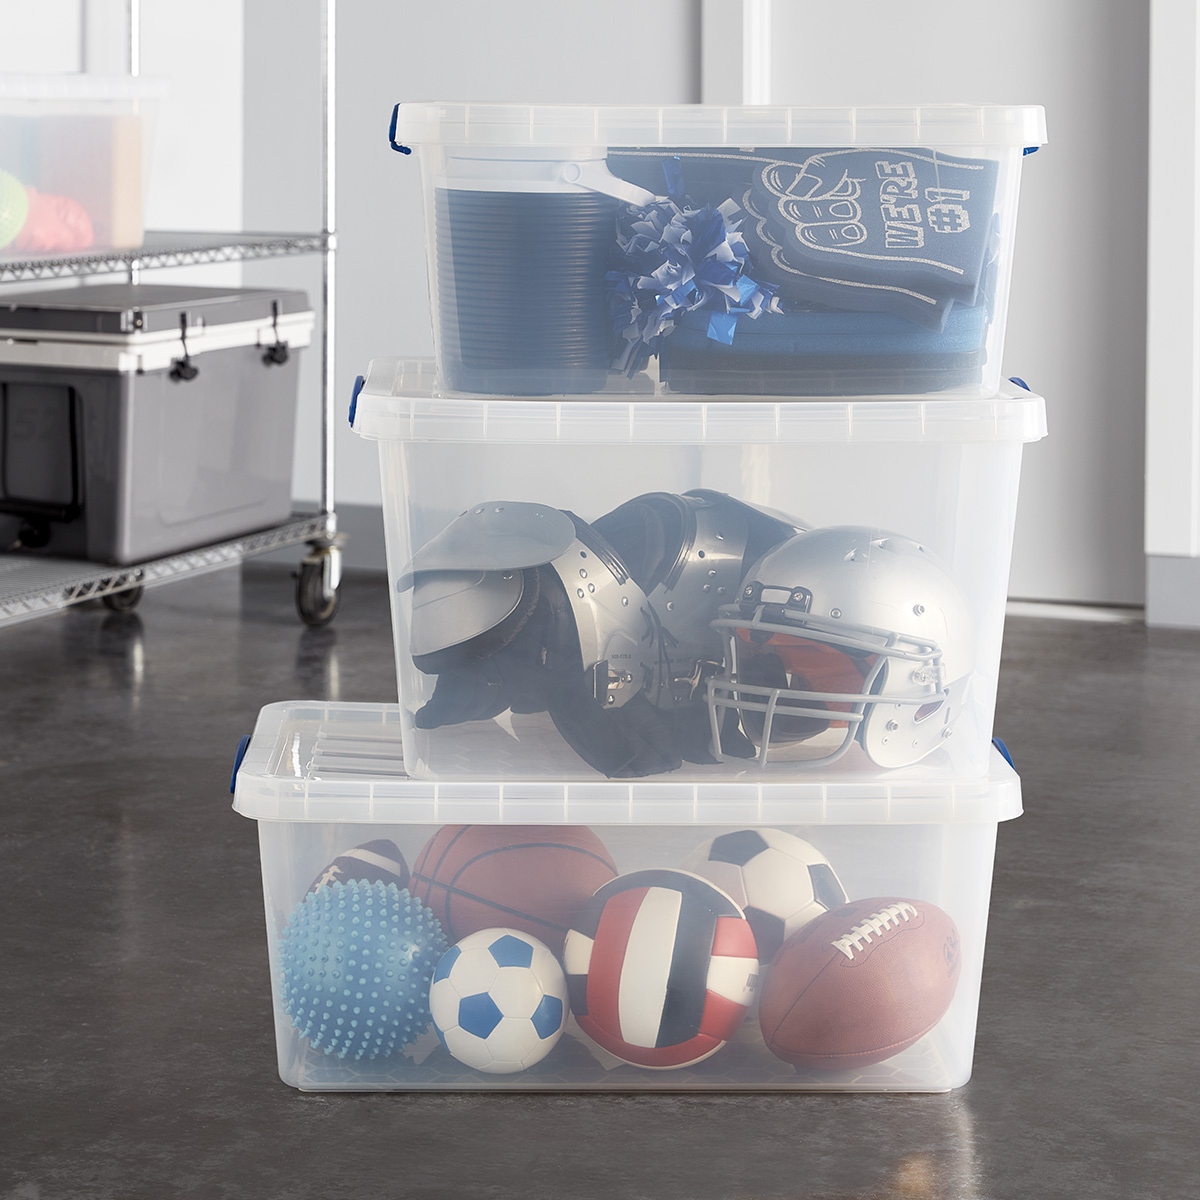 https://www.containerstore.com/catalogimages/439366/10081540g_Premier_Stacking_Tote_clea.jpg